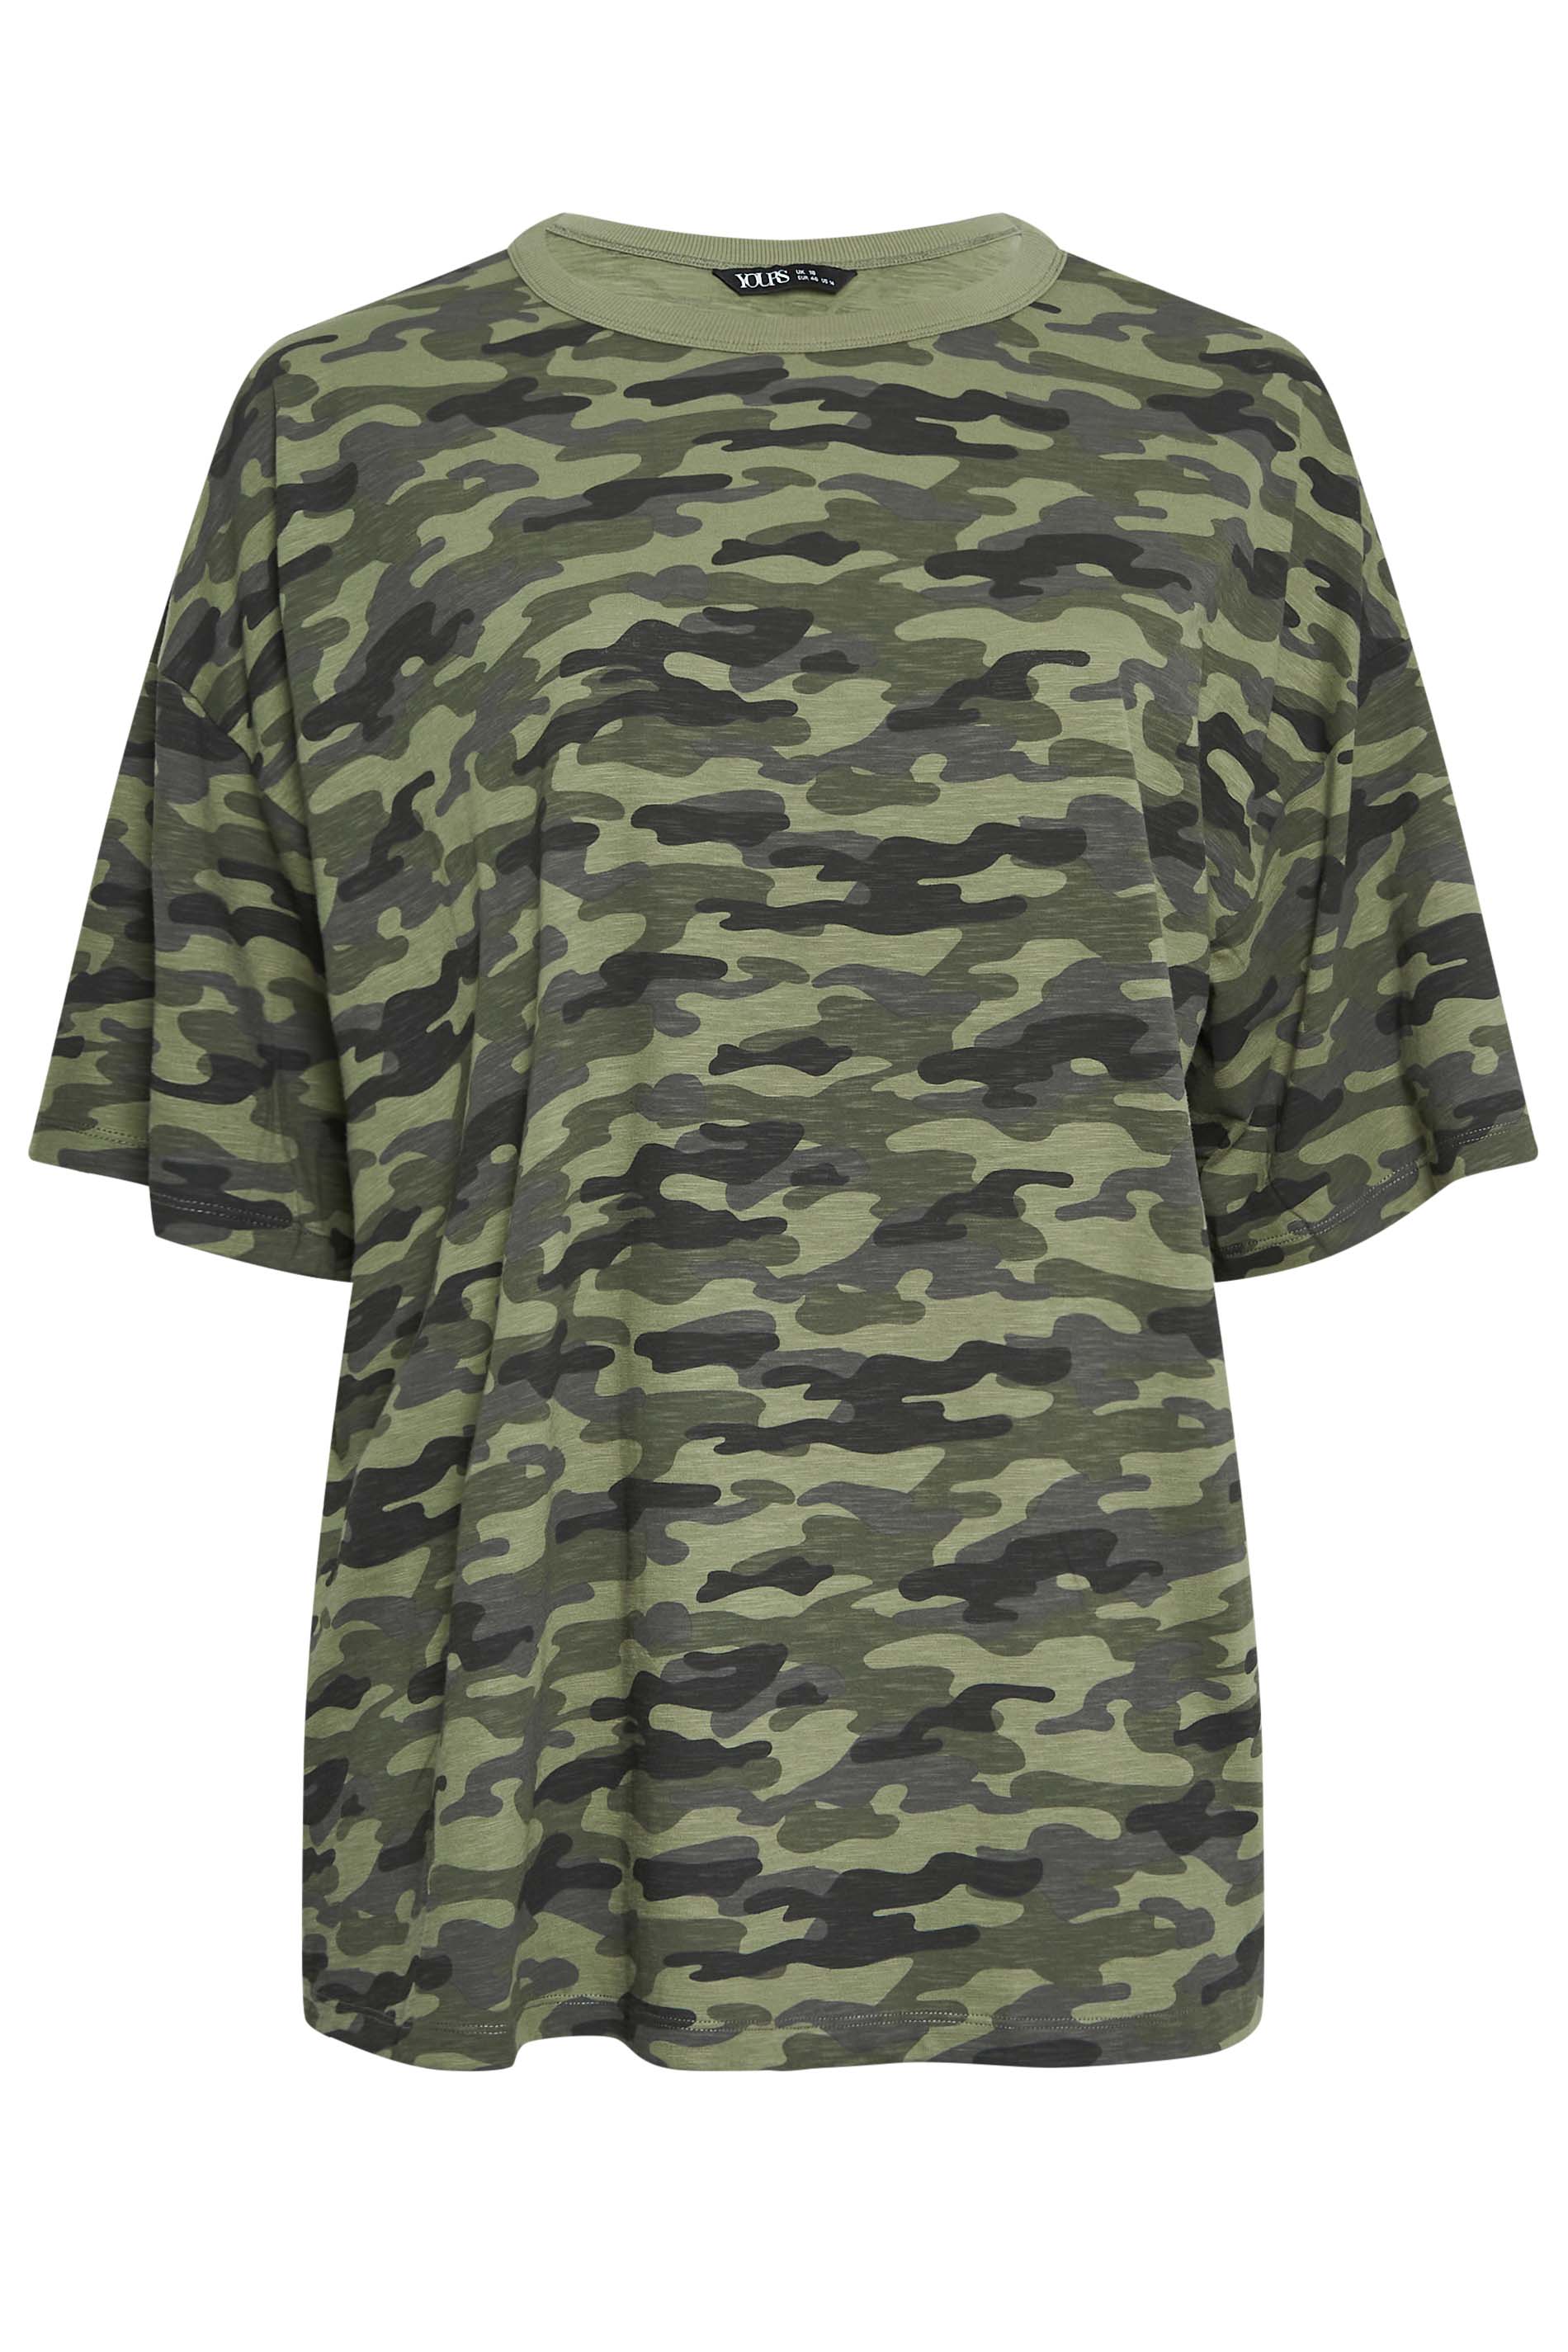 YOURS Curve Green Camo Print Oversized Boxy T-Shirt